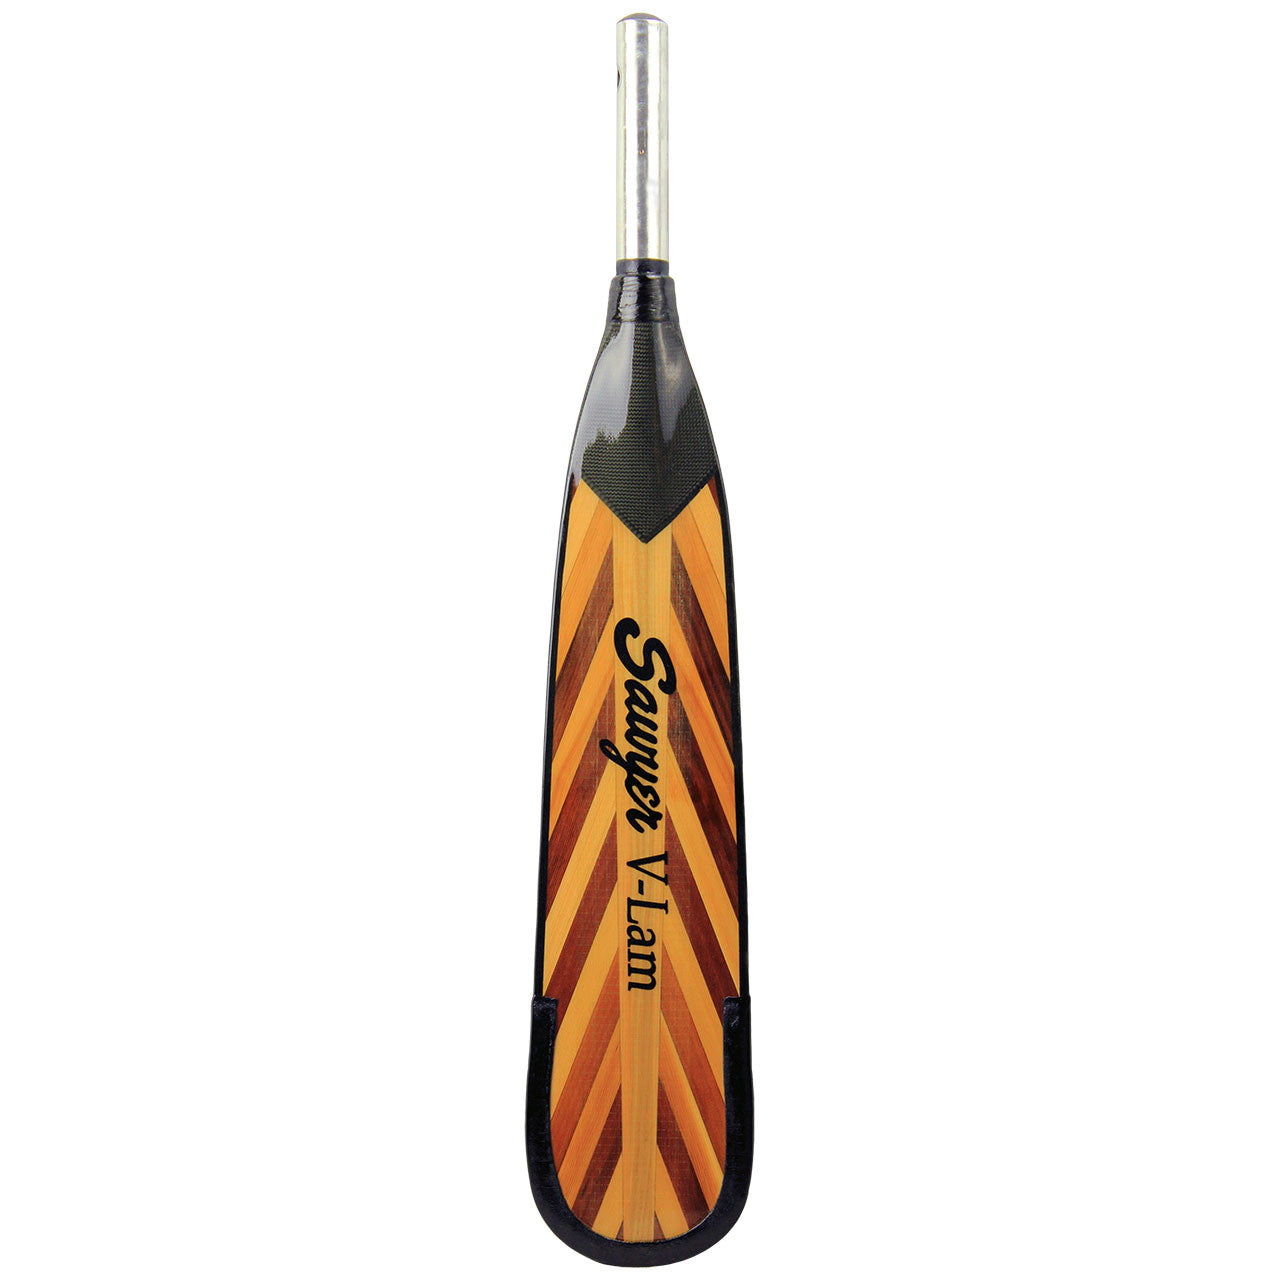 A fiberglass and laminated V-Lam Fir Oar Blade with an orange and black stripe, branded by Sawyer.